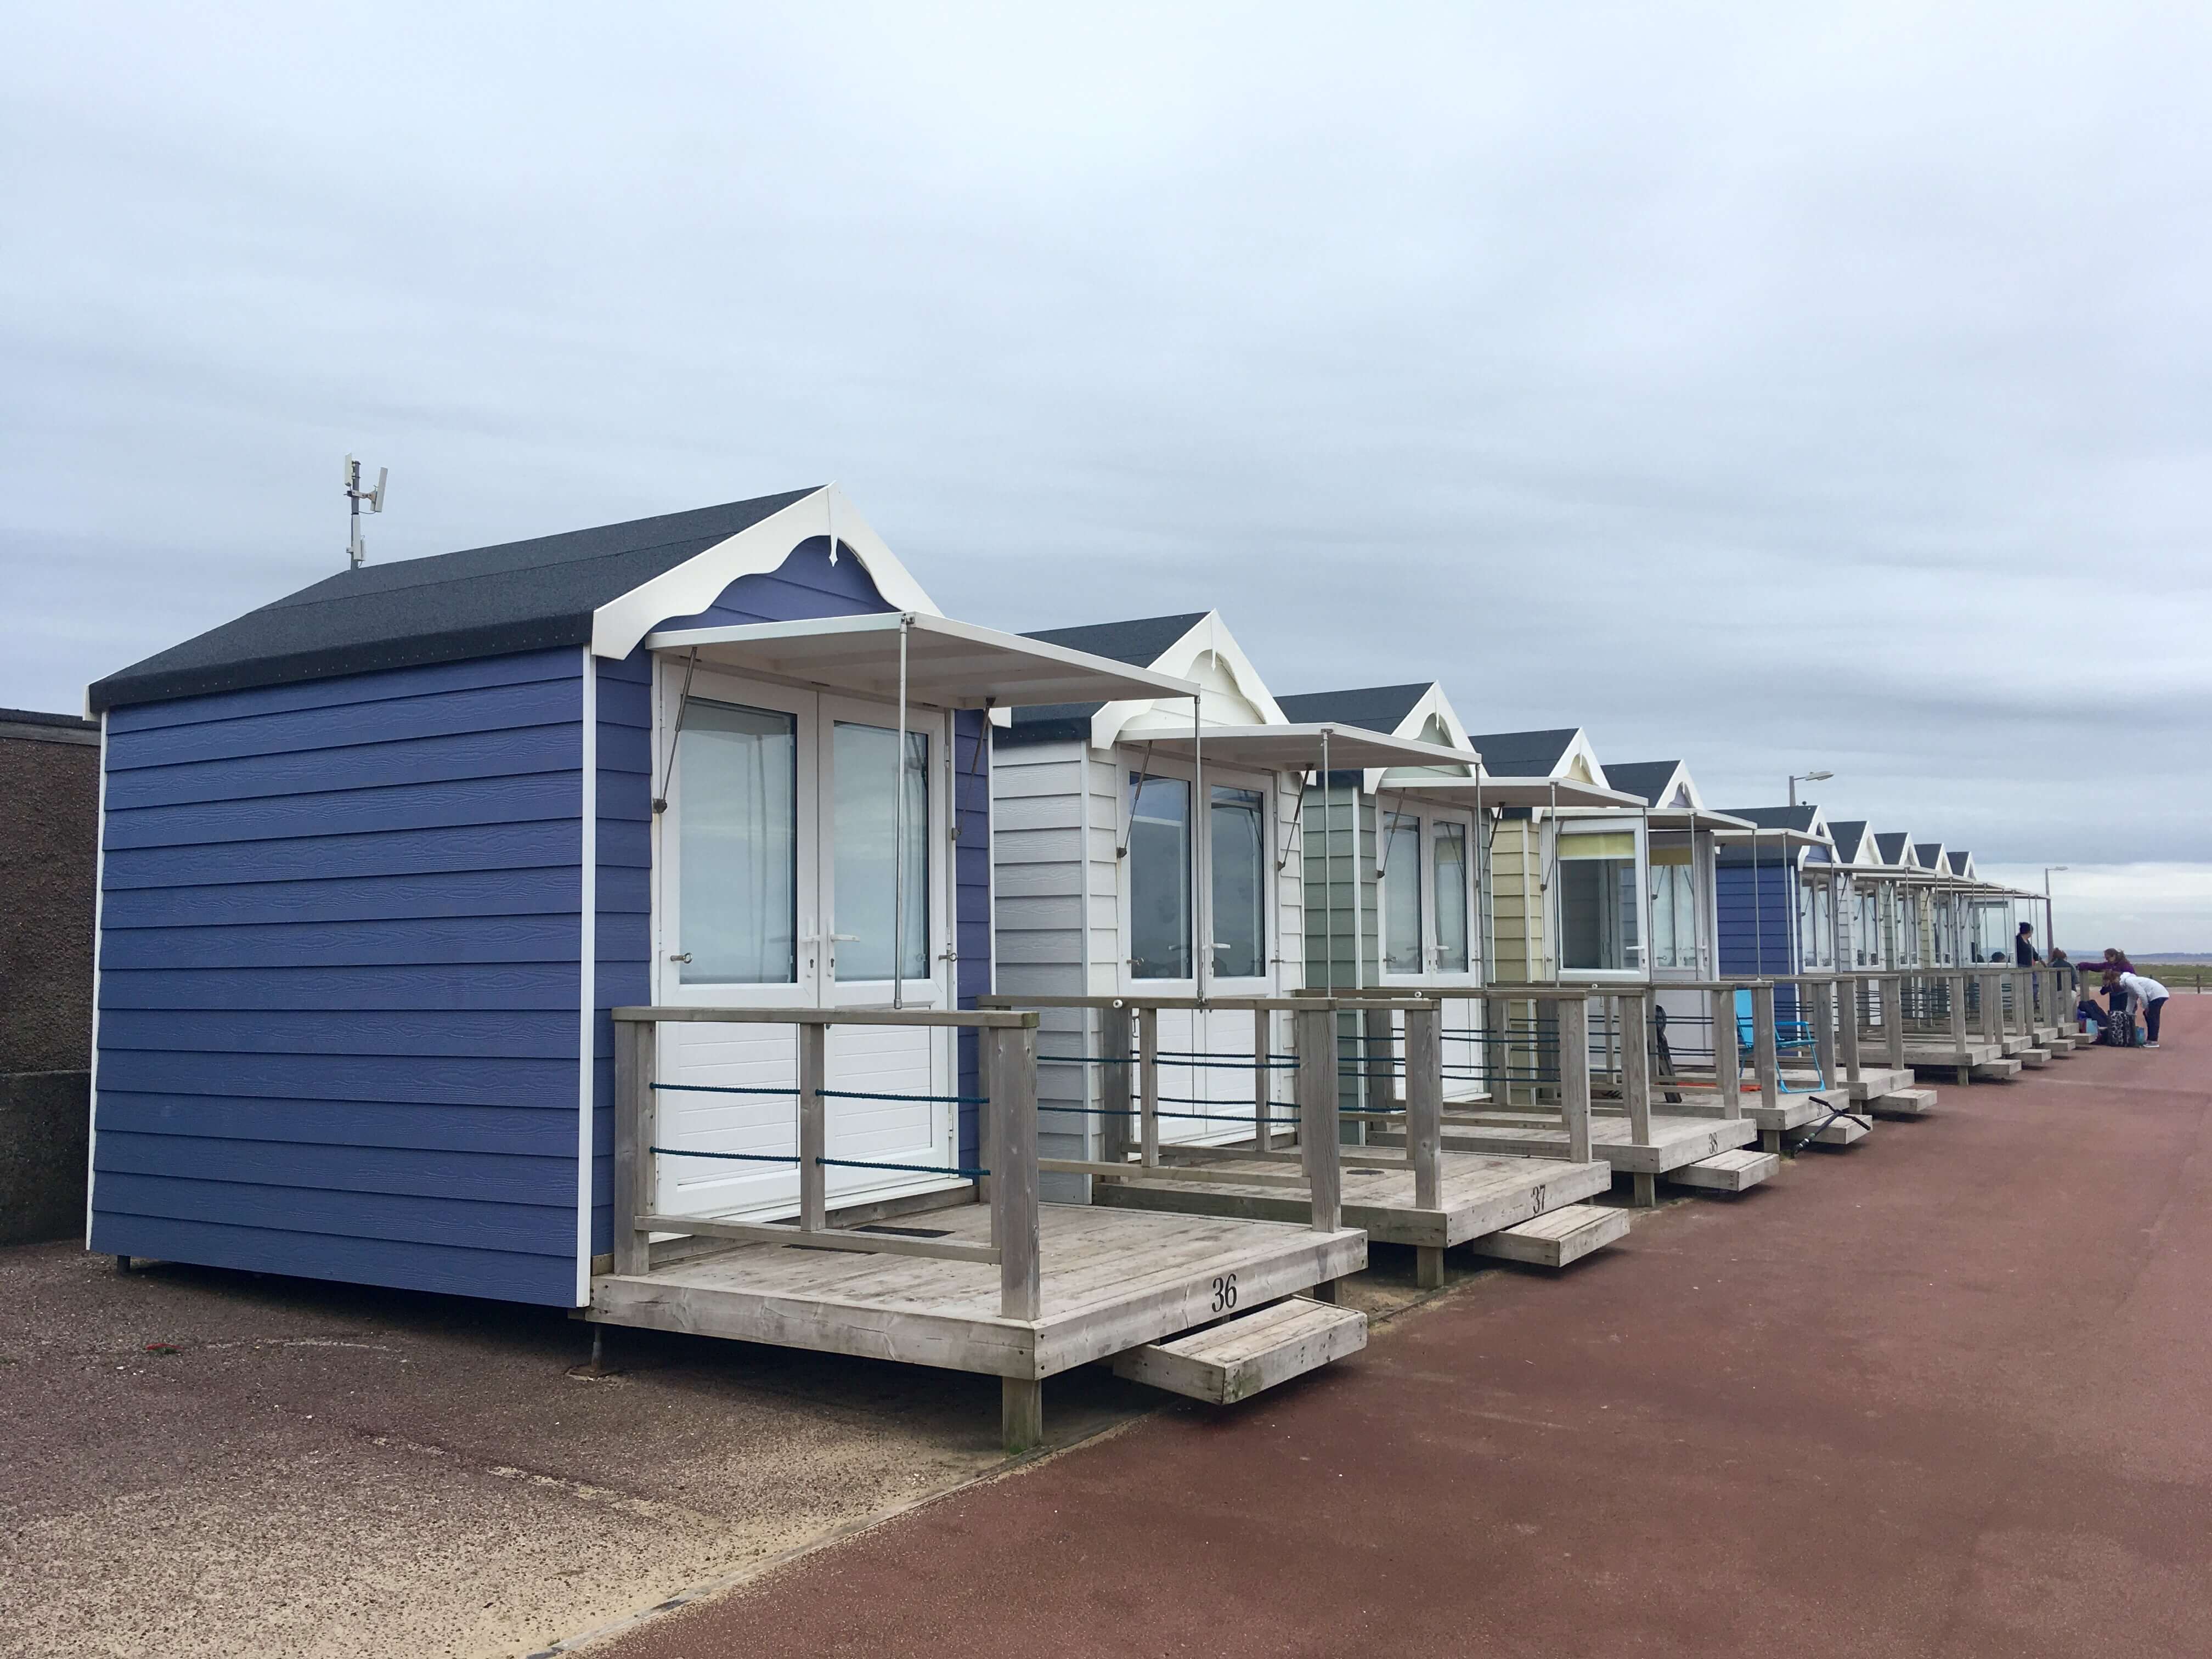 St Annes beach huts review